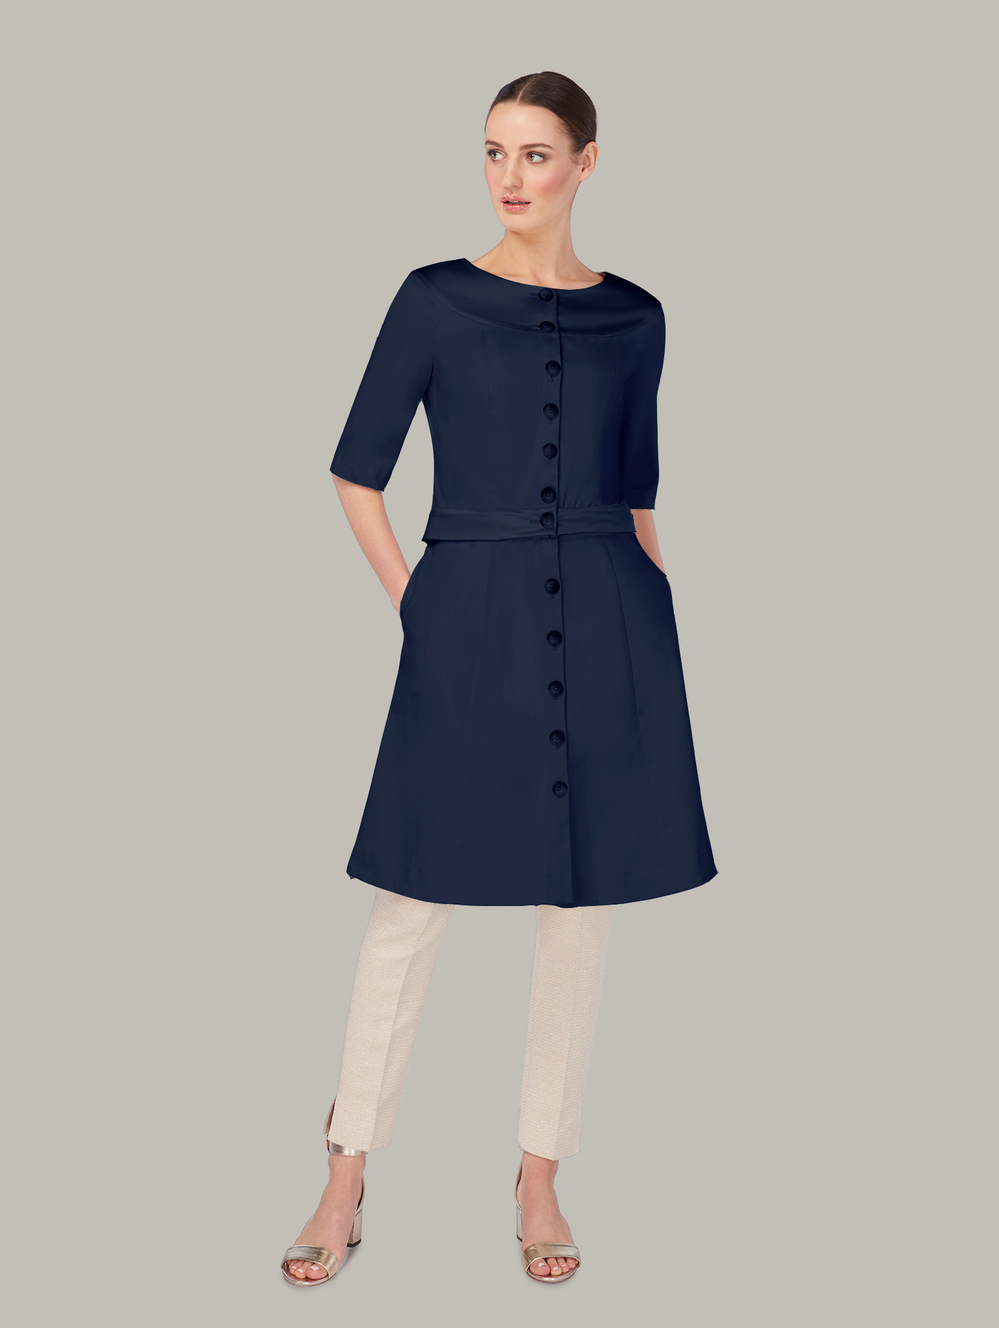 Front view of LINDEN 4-way coat-dress in Peacoat, available from British sustainable fashion brand DEPLOY